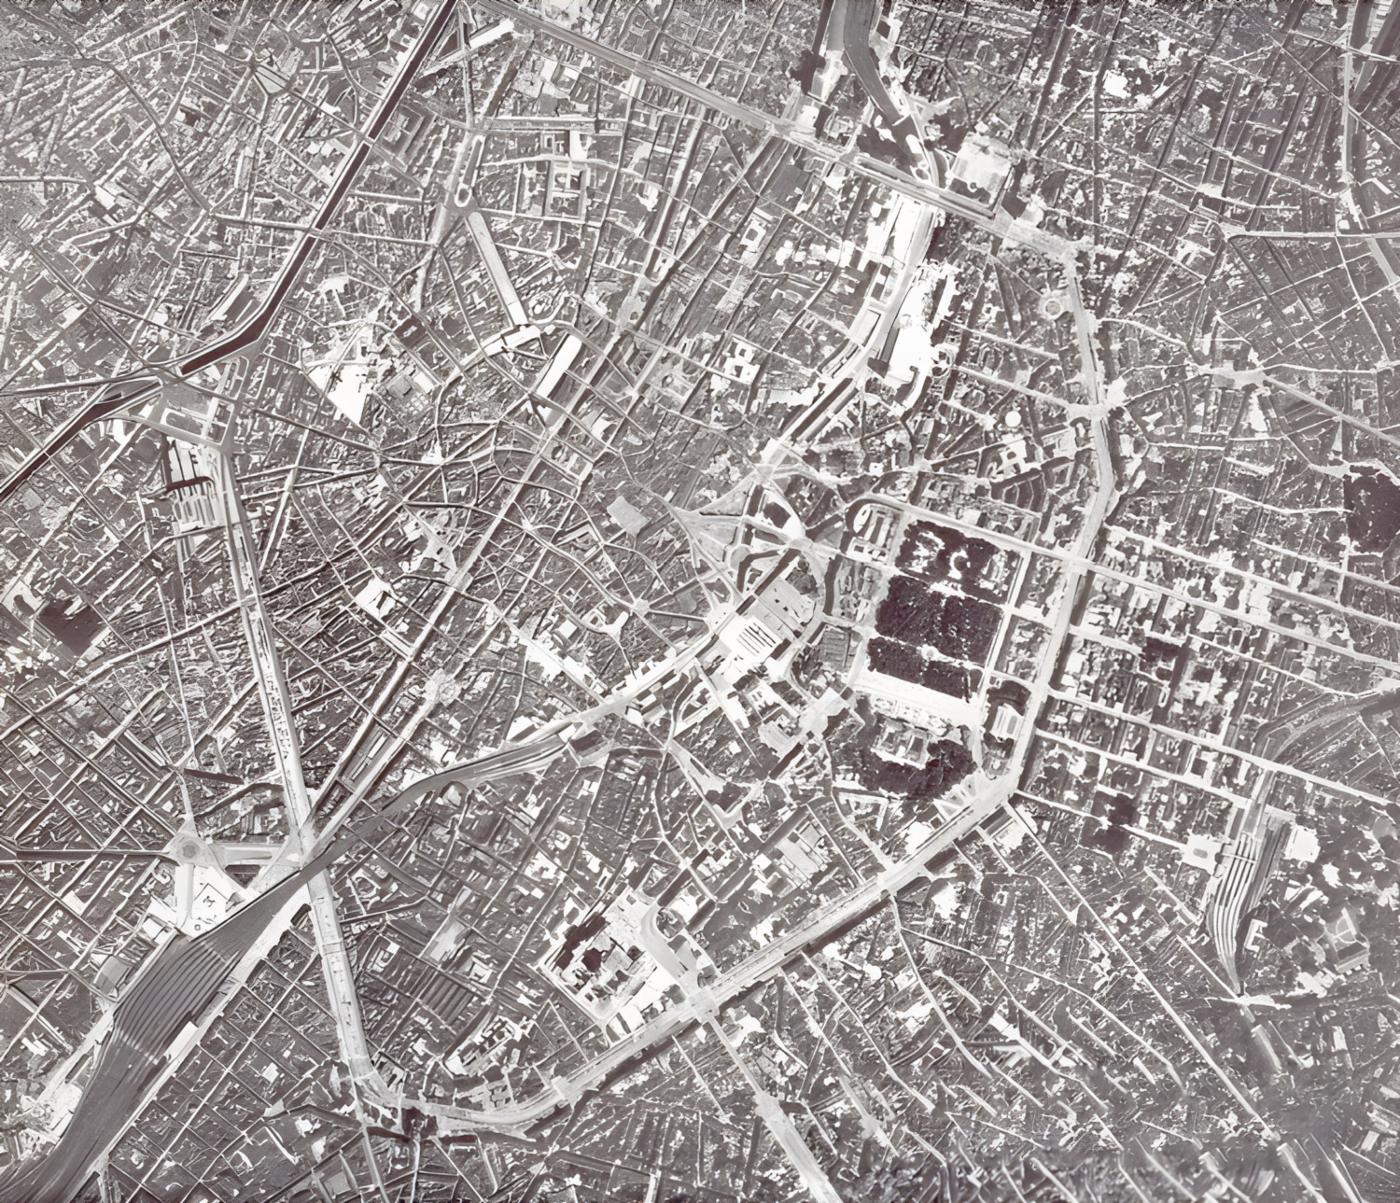  An aerial photograph of the center of Brussels, where NATO Headquarters is established and where the 15th Session of the North Atlantic Assembly was held last October
